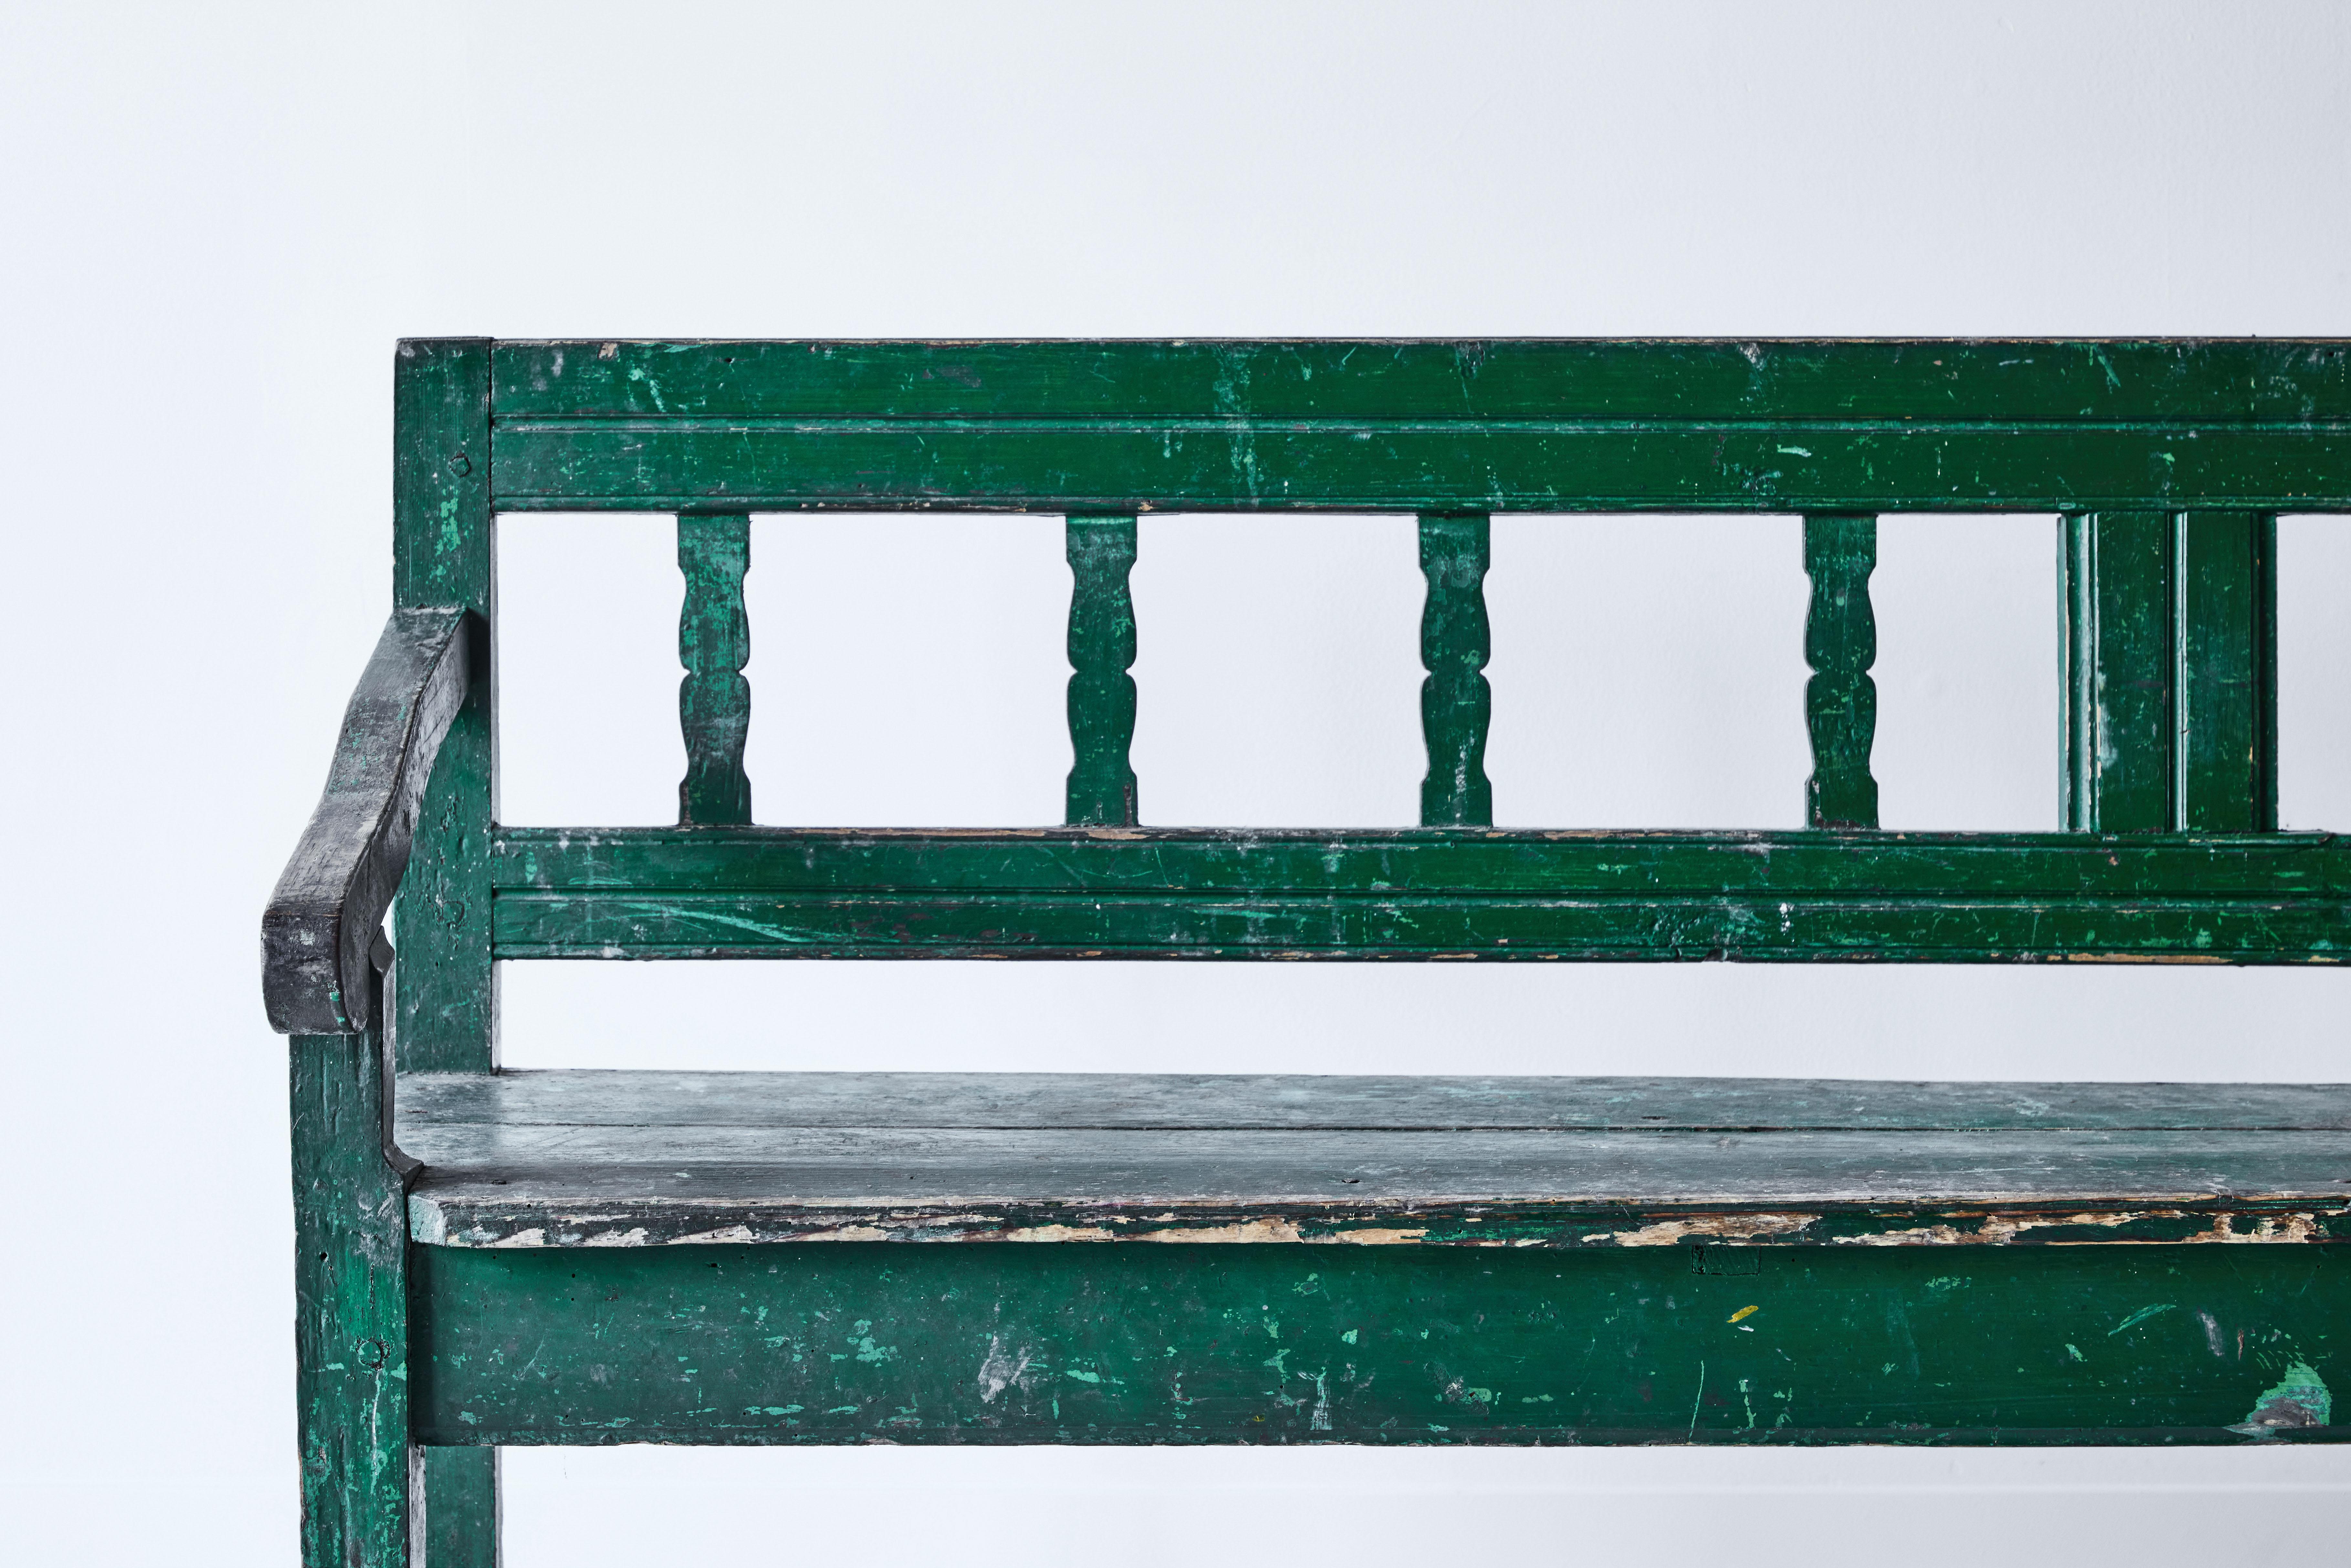 This beautifully rustic French painted bench features original green paint and a lovely patina. The paint has been distressed throughout the years revealing the natural wood below. It is the perfect piece for an entryway or porch. This bench has